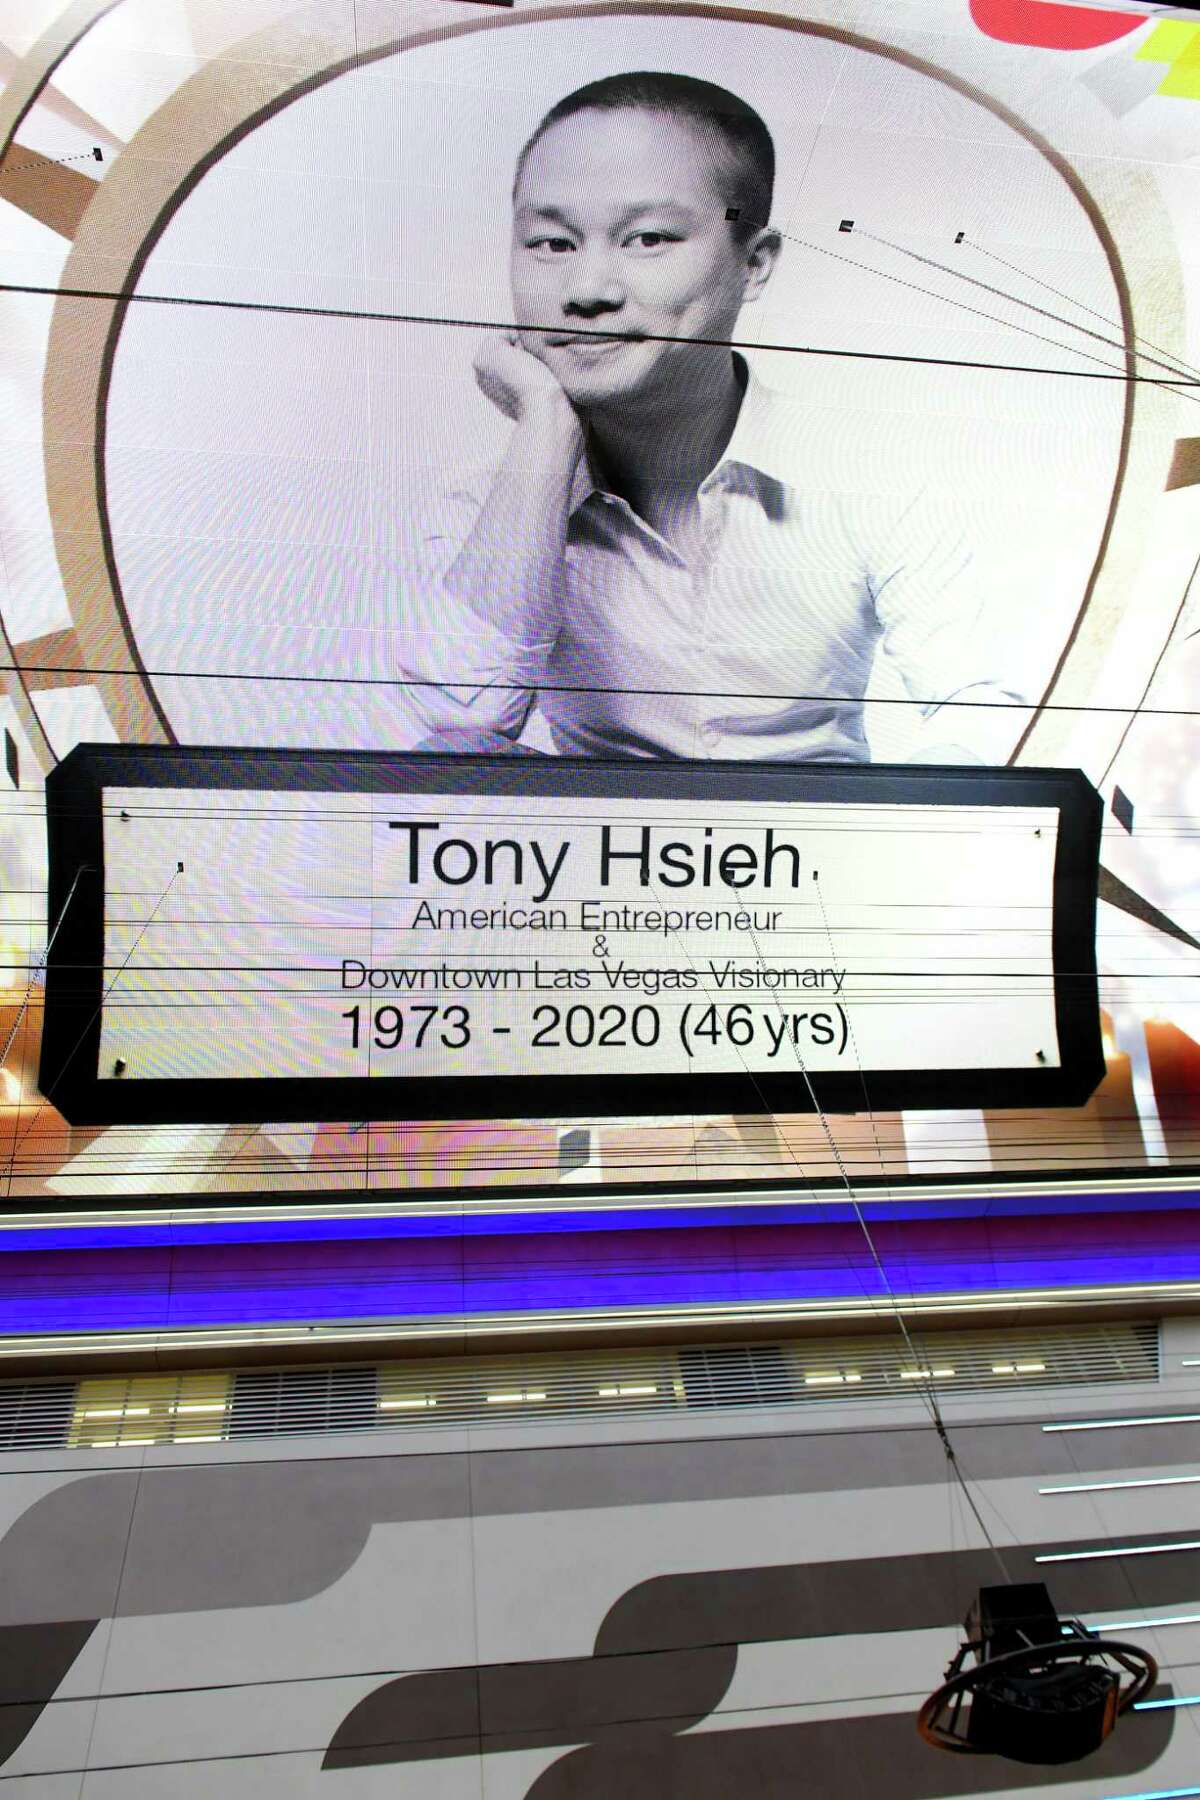 LAS VEGAS, NEVADA - NOVEMBER 28: A tribute to tech entrepreneur Tony Hsieh is displayed on the Fremont Street Experience attraction's Viva Vision screen on November 28, 2020 in Las Vegas, Nevada. Hsieh, the former CEO of Zappos.com, known for his role in the revitalization of downtown Las Vegas, died on November 27, 2020, at age 46.